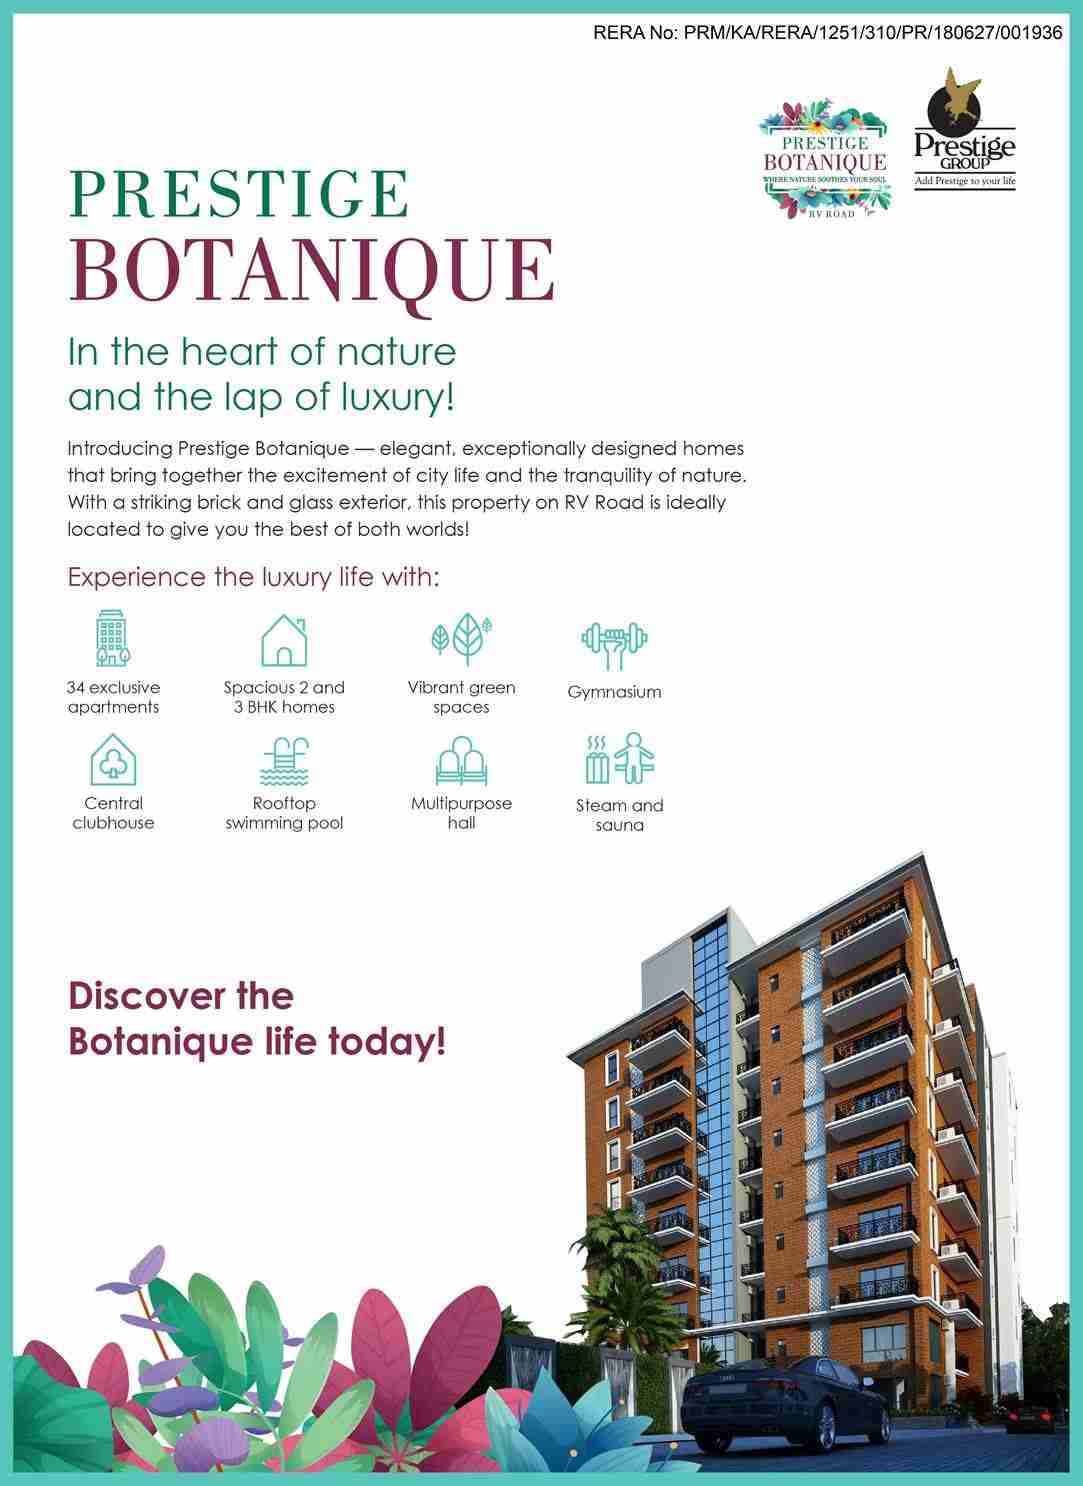 Live in the heart of nature and the lap of luxury at Prestige Botanique in Bangalore Update